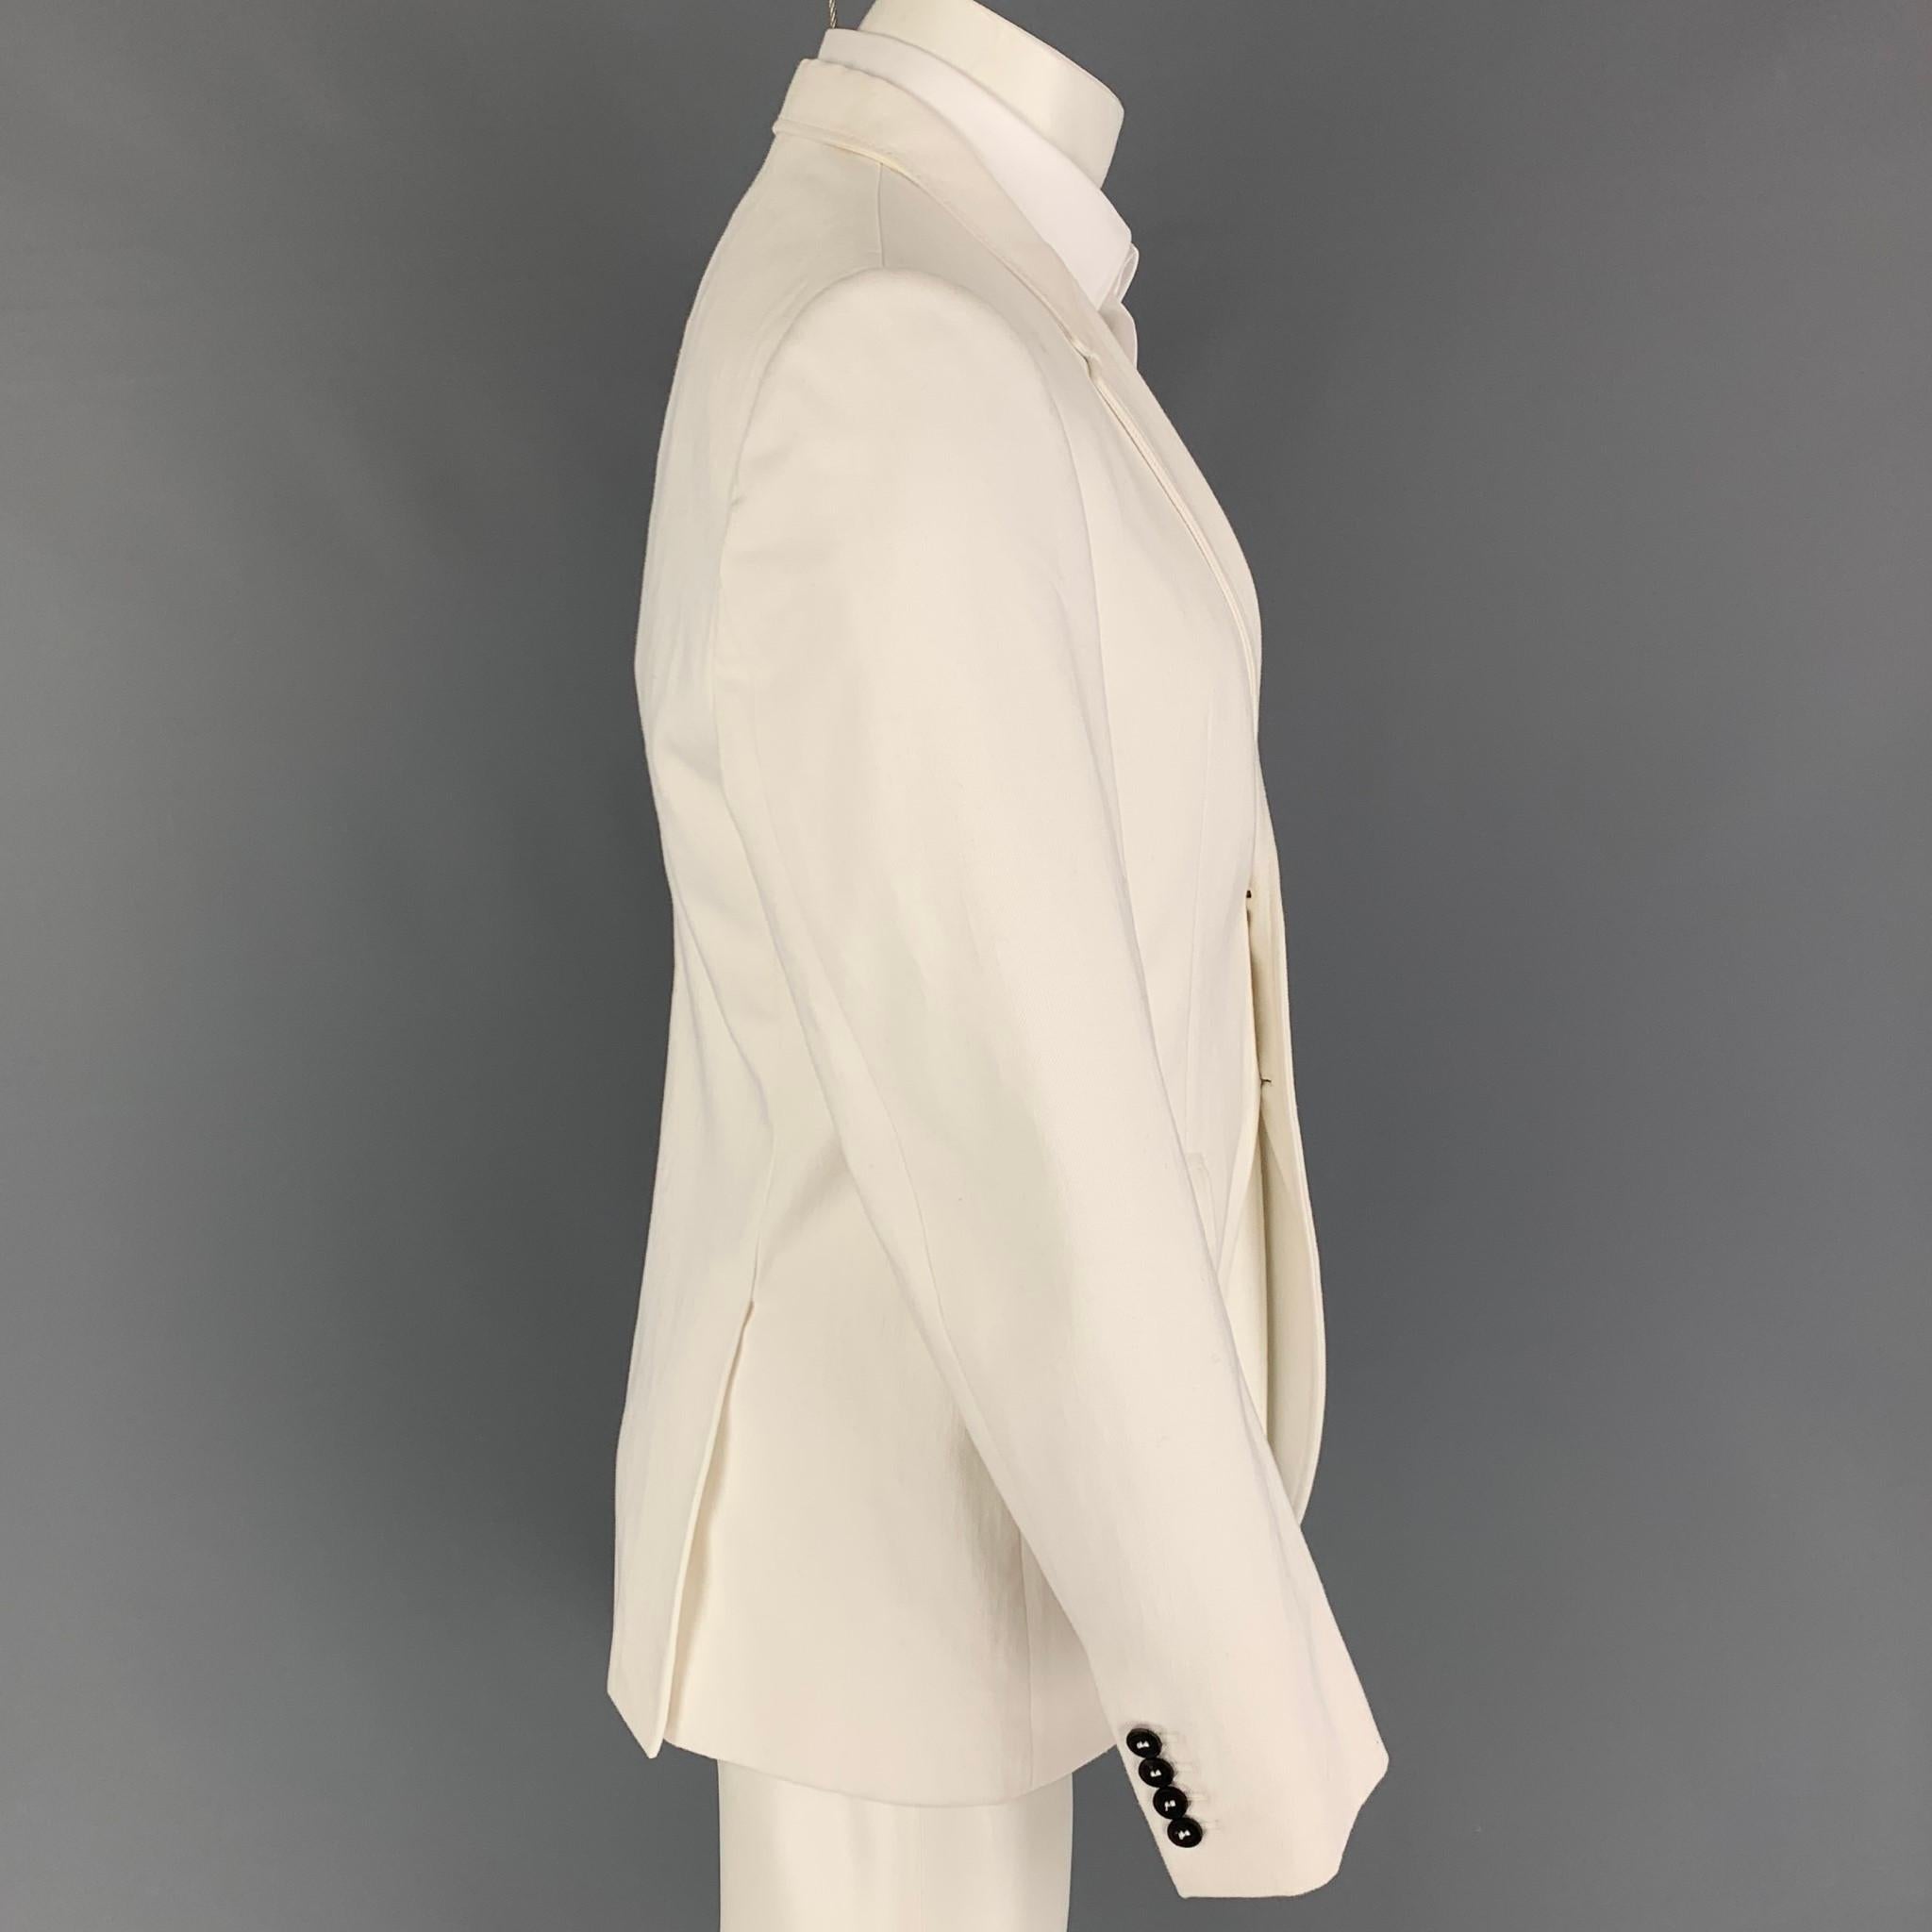 BURBERRY PRORSUM sport coat comes in a white cotton with a full liner featuring a notch lapel, flap pockets, double back vent, and a double button closure. Made in Italy. 

Very Good Pre-Owned Condition.
Marked: 50

Measurements:

Shoulder: 17